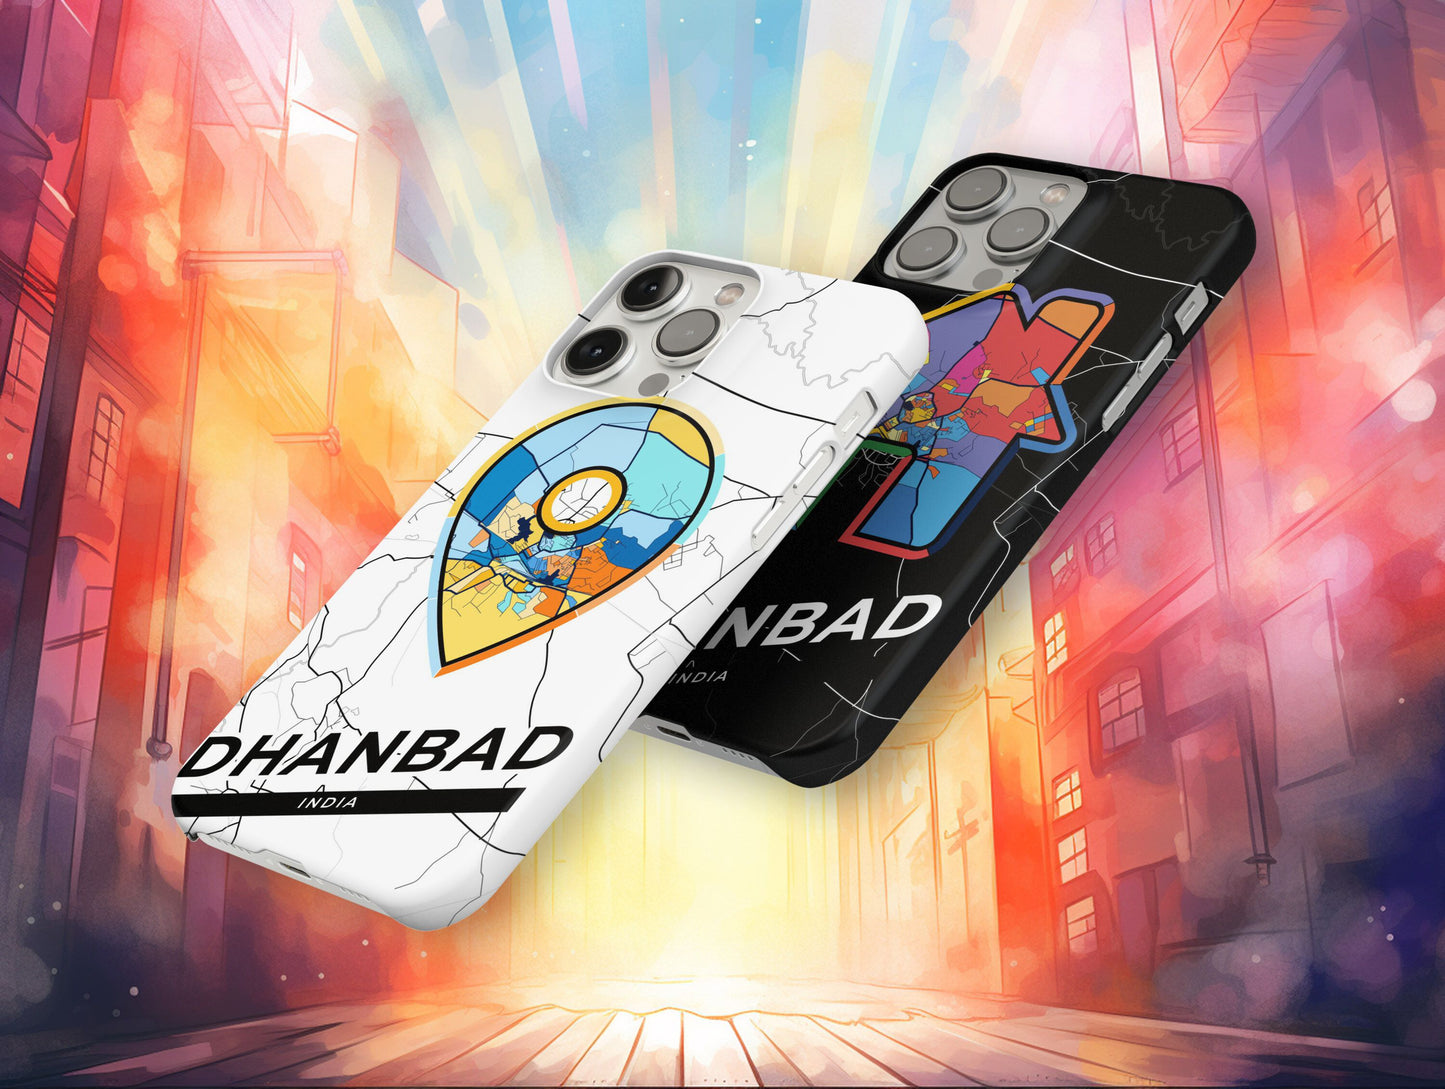 Dhanbad India slim phone case with colorful icon. Birthday, wedding or housewarming gift. Couple match cases.